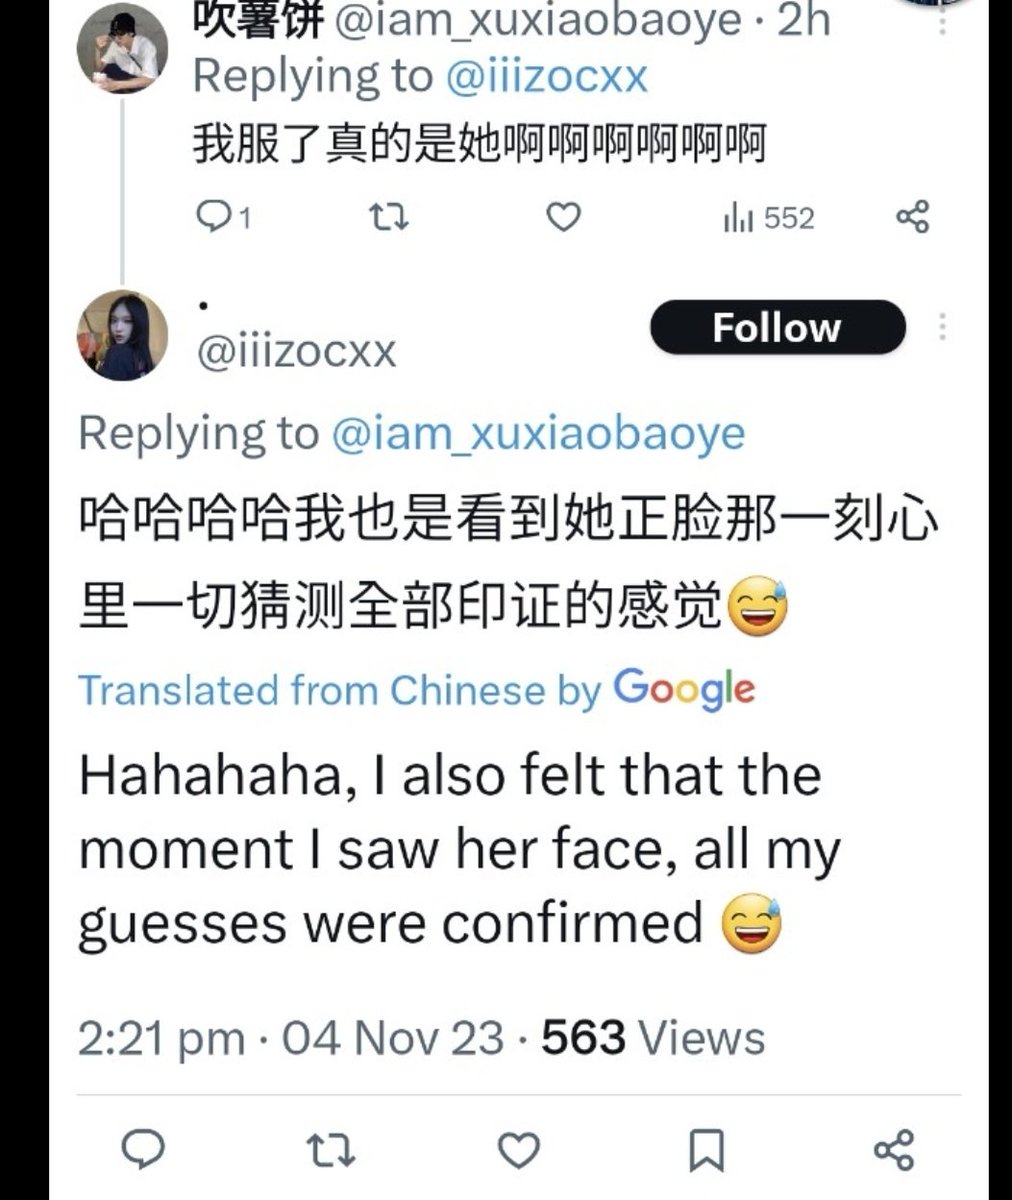 These were the replies of the Chinese Wooshik fan who allegedly saw them. And she attended the fanmeet. You can just prove that she is lying if she really is but you made the issue worse by dragging his friend and accuse him he is jealous.

#choiwooshik #choiwooshikfansarecrazy